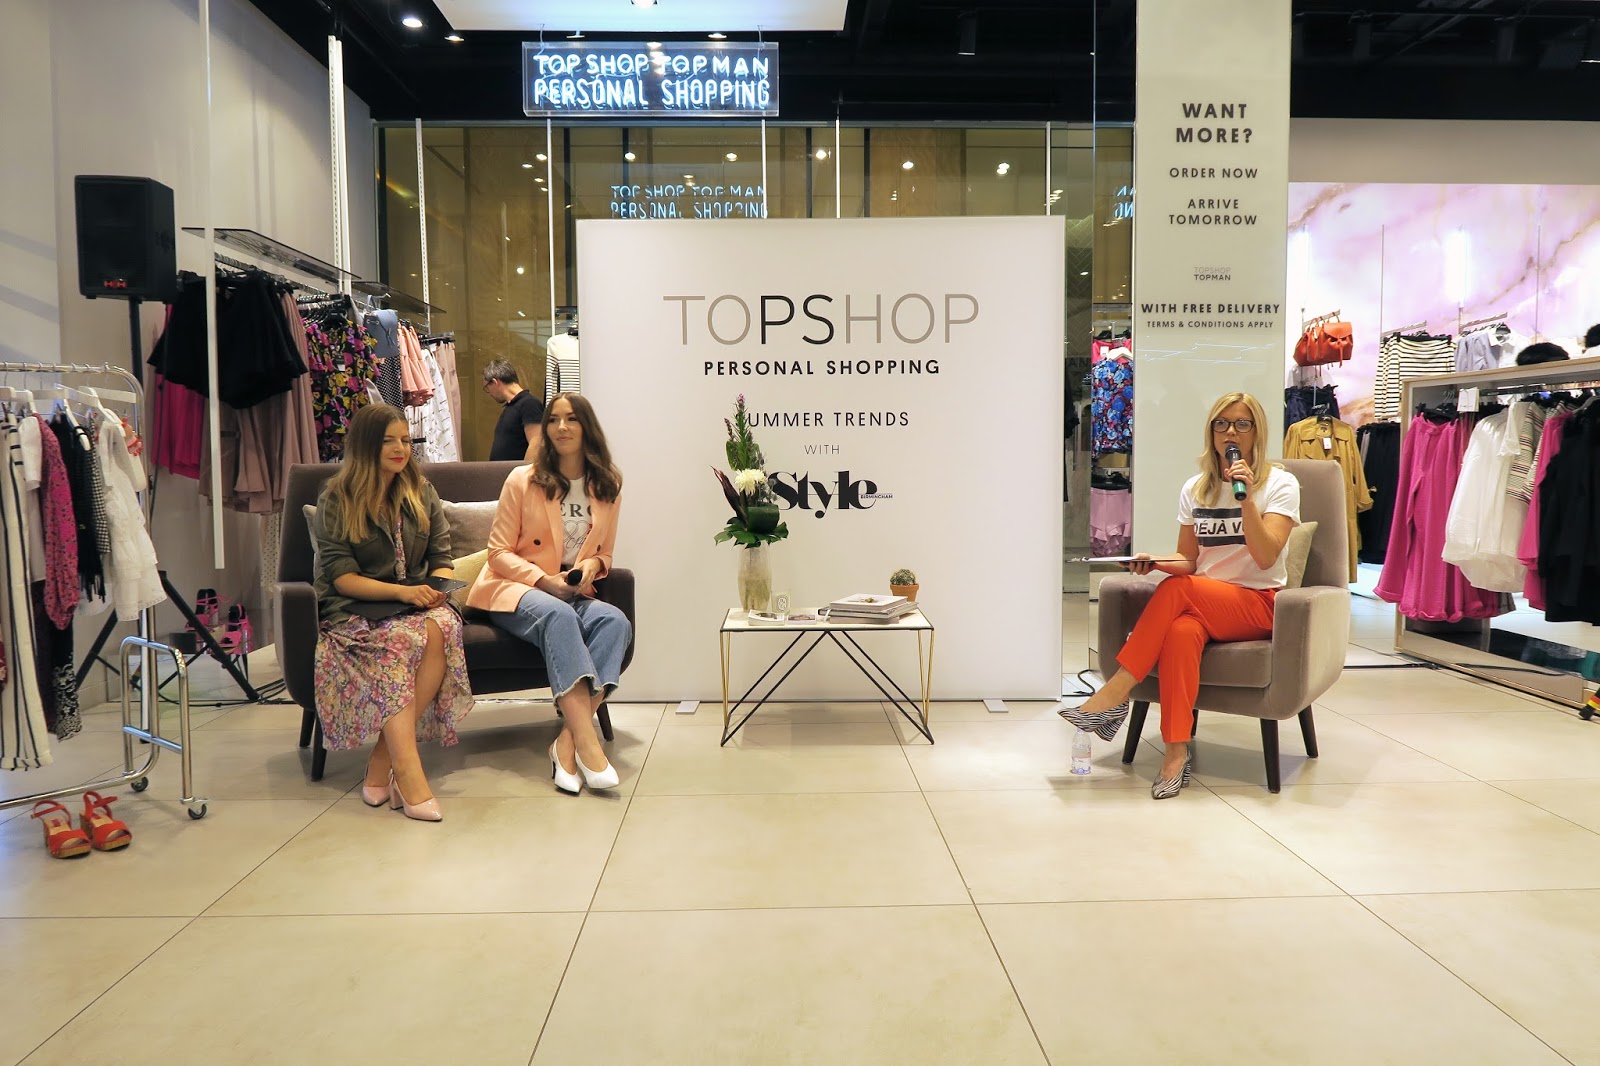 TOPSHOP PERSONAL SHOPPING EVENT